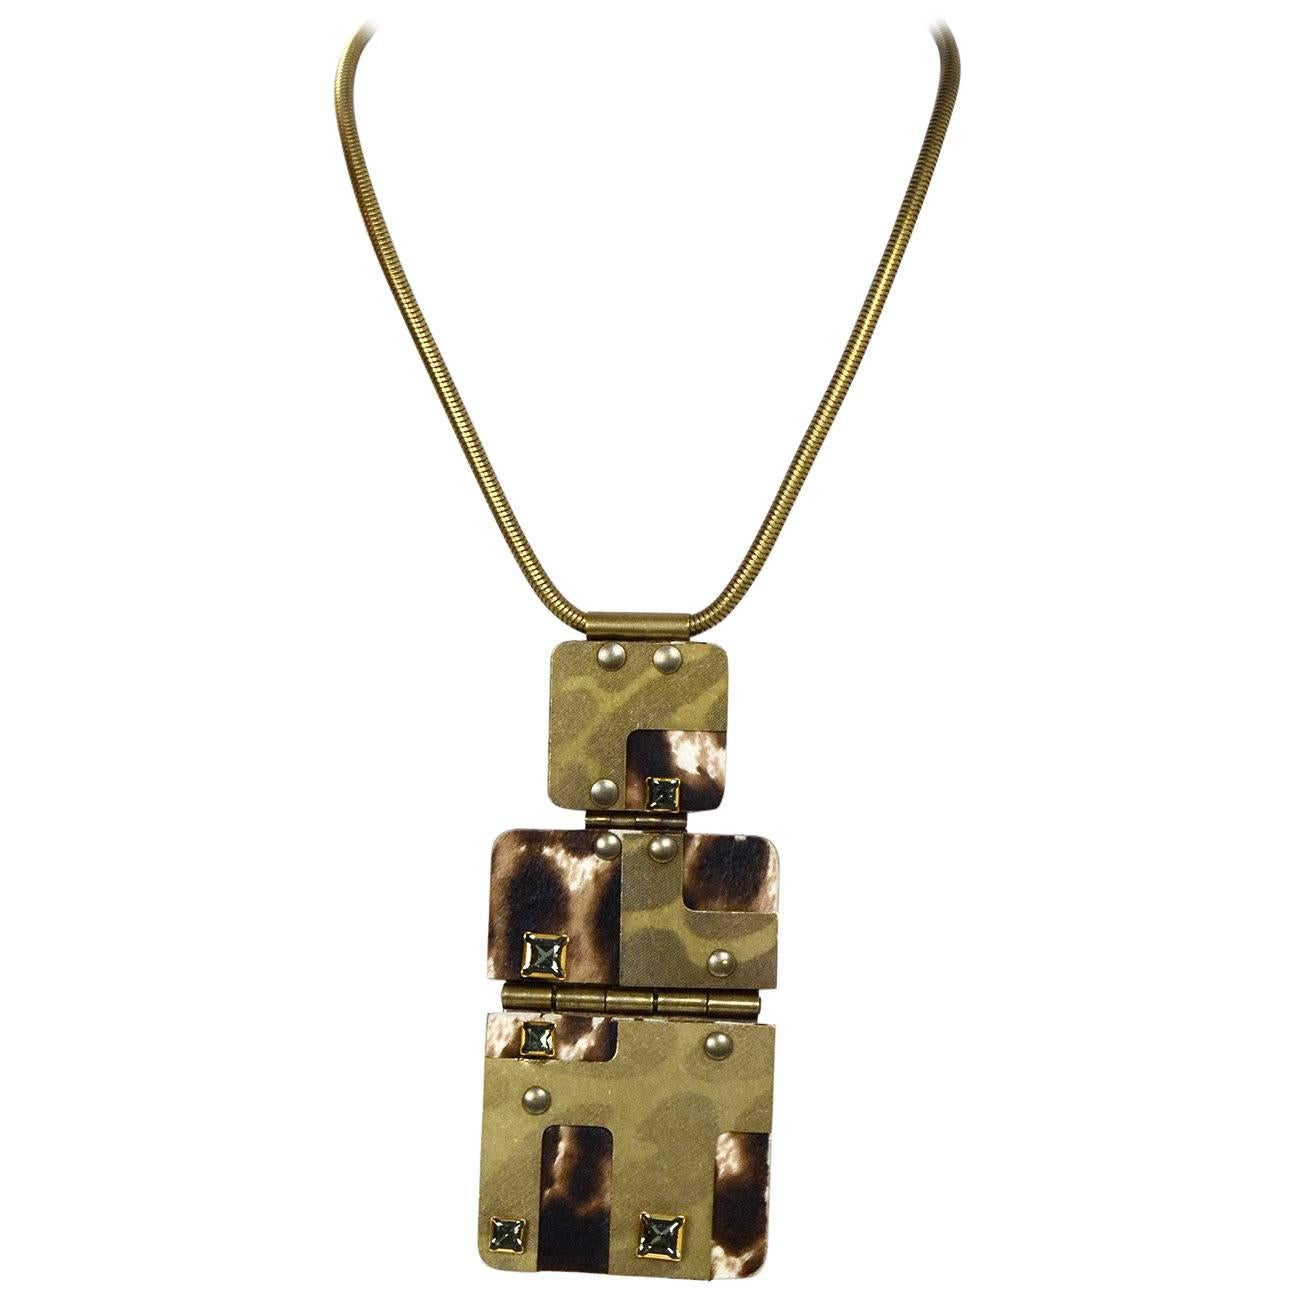 Lanvin Ponyhair & Crystal Pendant Necklace 
Features metal, ponyhair, and crystal detailed large pendant and lever to shorten or lengthen 

Made In: France
Color: Antiqued goldtone, brown and beige
Materials: Metal, ponyhair and